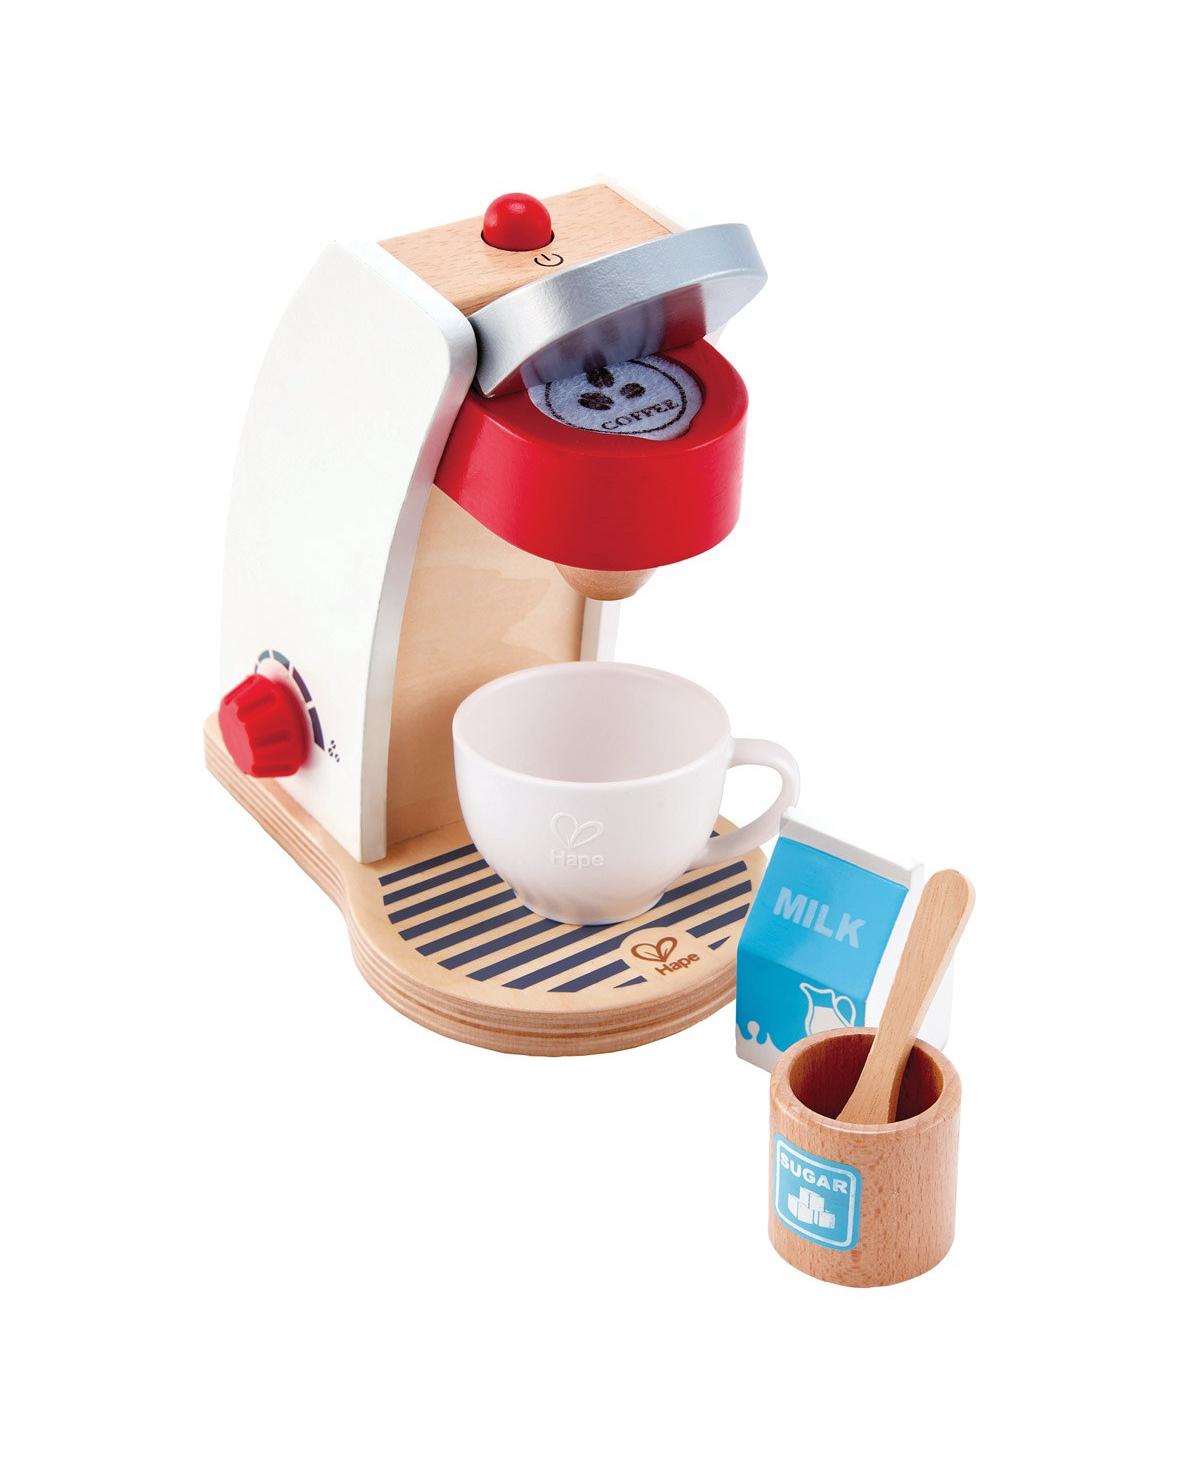 Hape Babies' My Coffee Machine Wooden Play Set In Multicolored